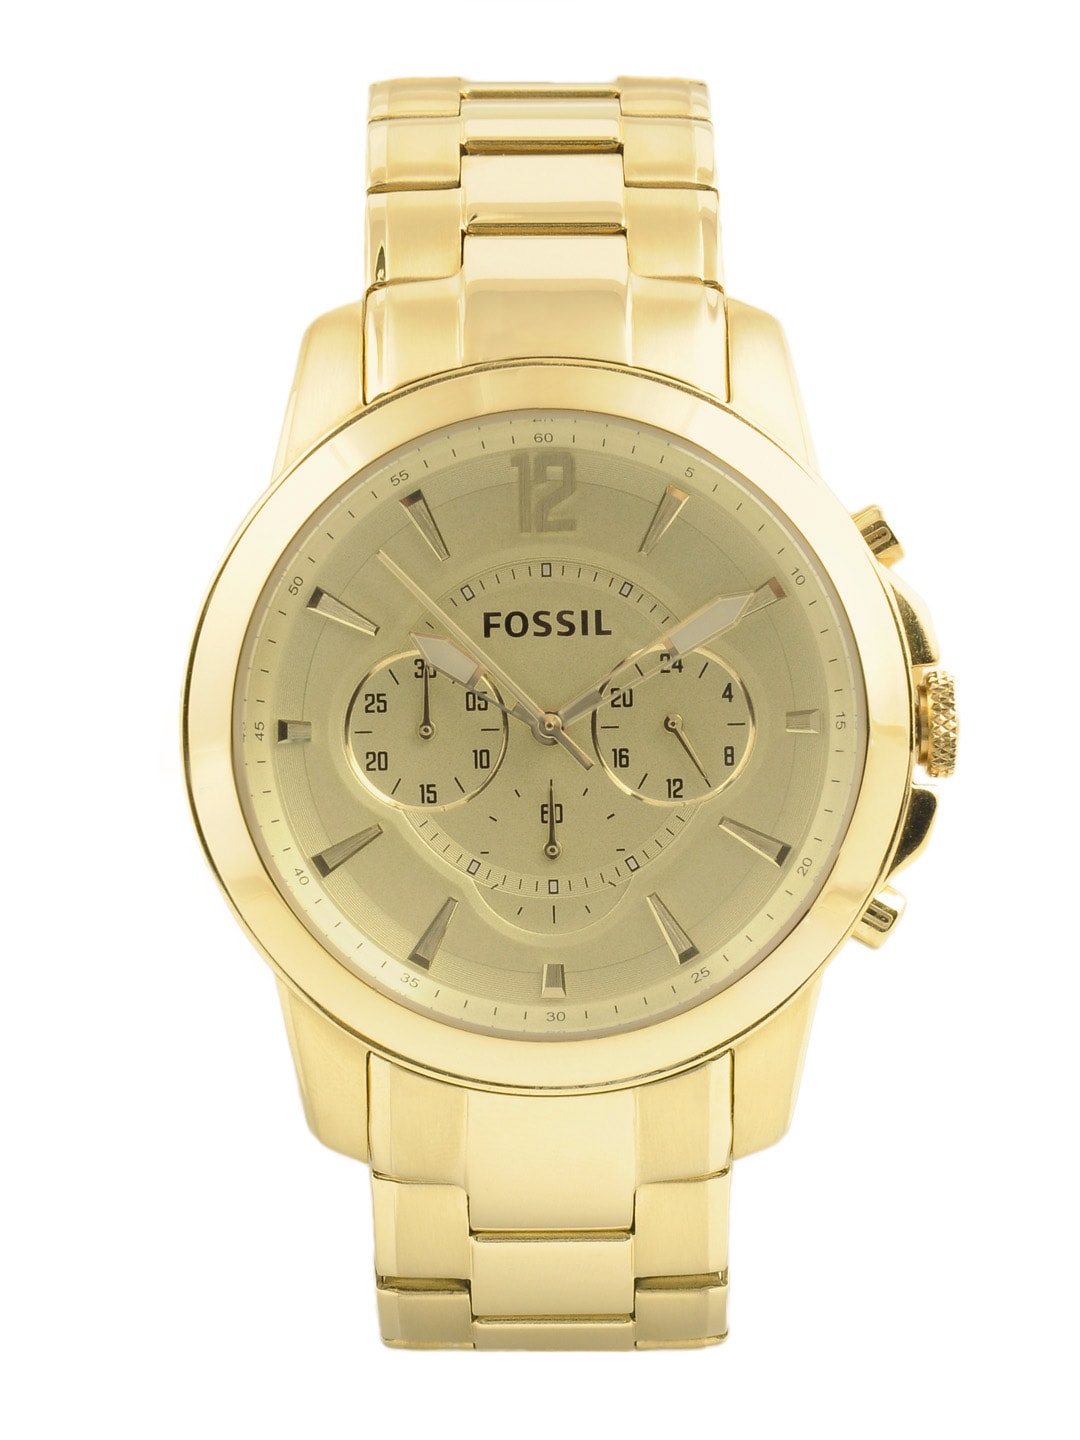 Fossil Unisex Gold-Toned Dial Chronograph Watch FS4724